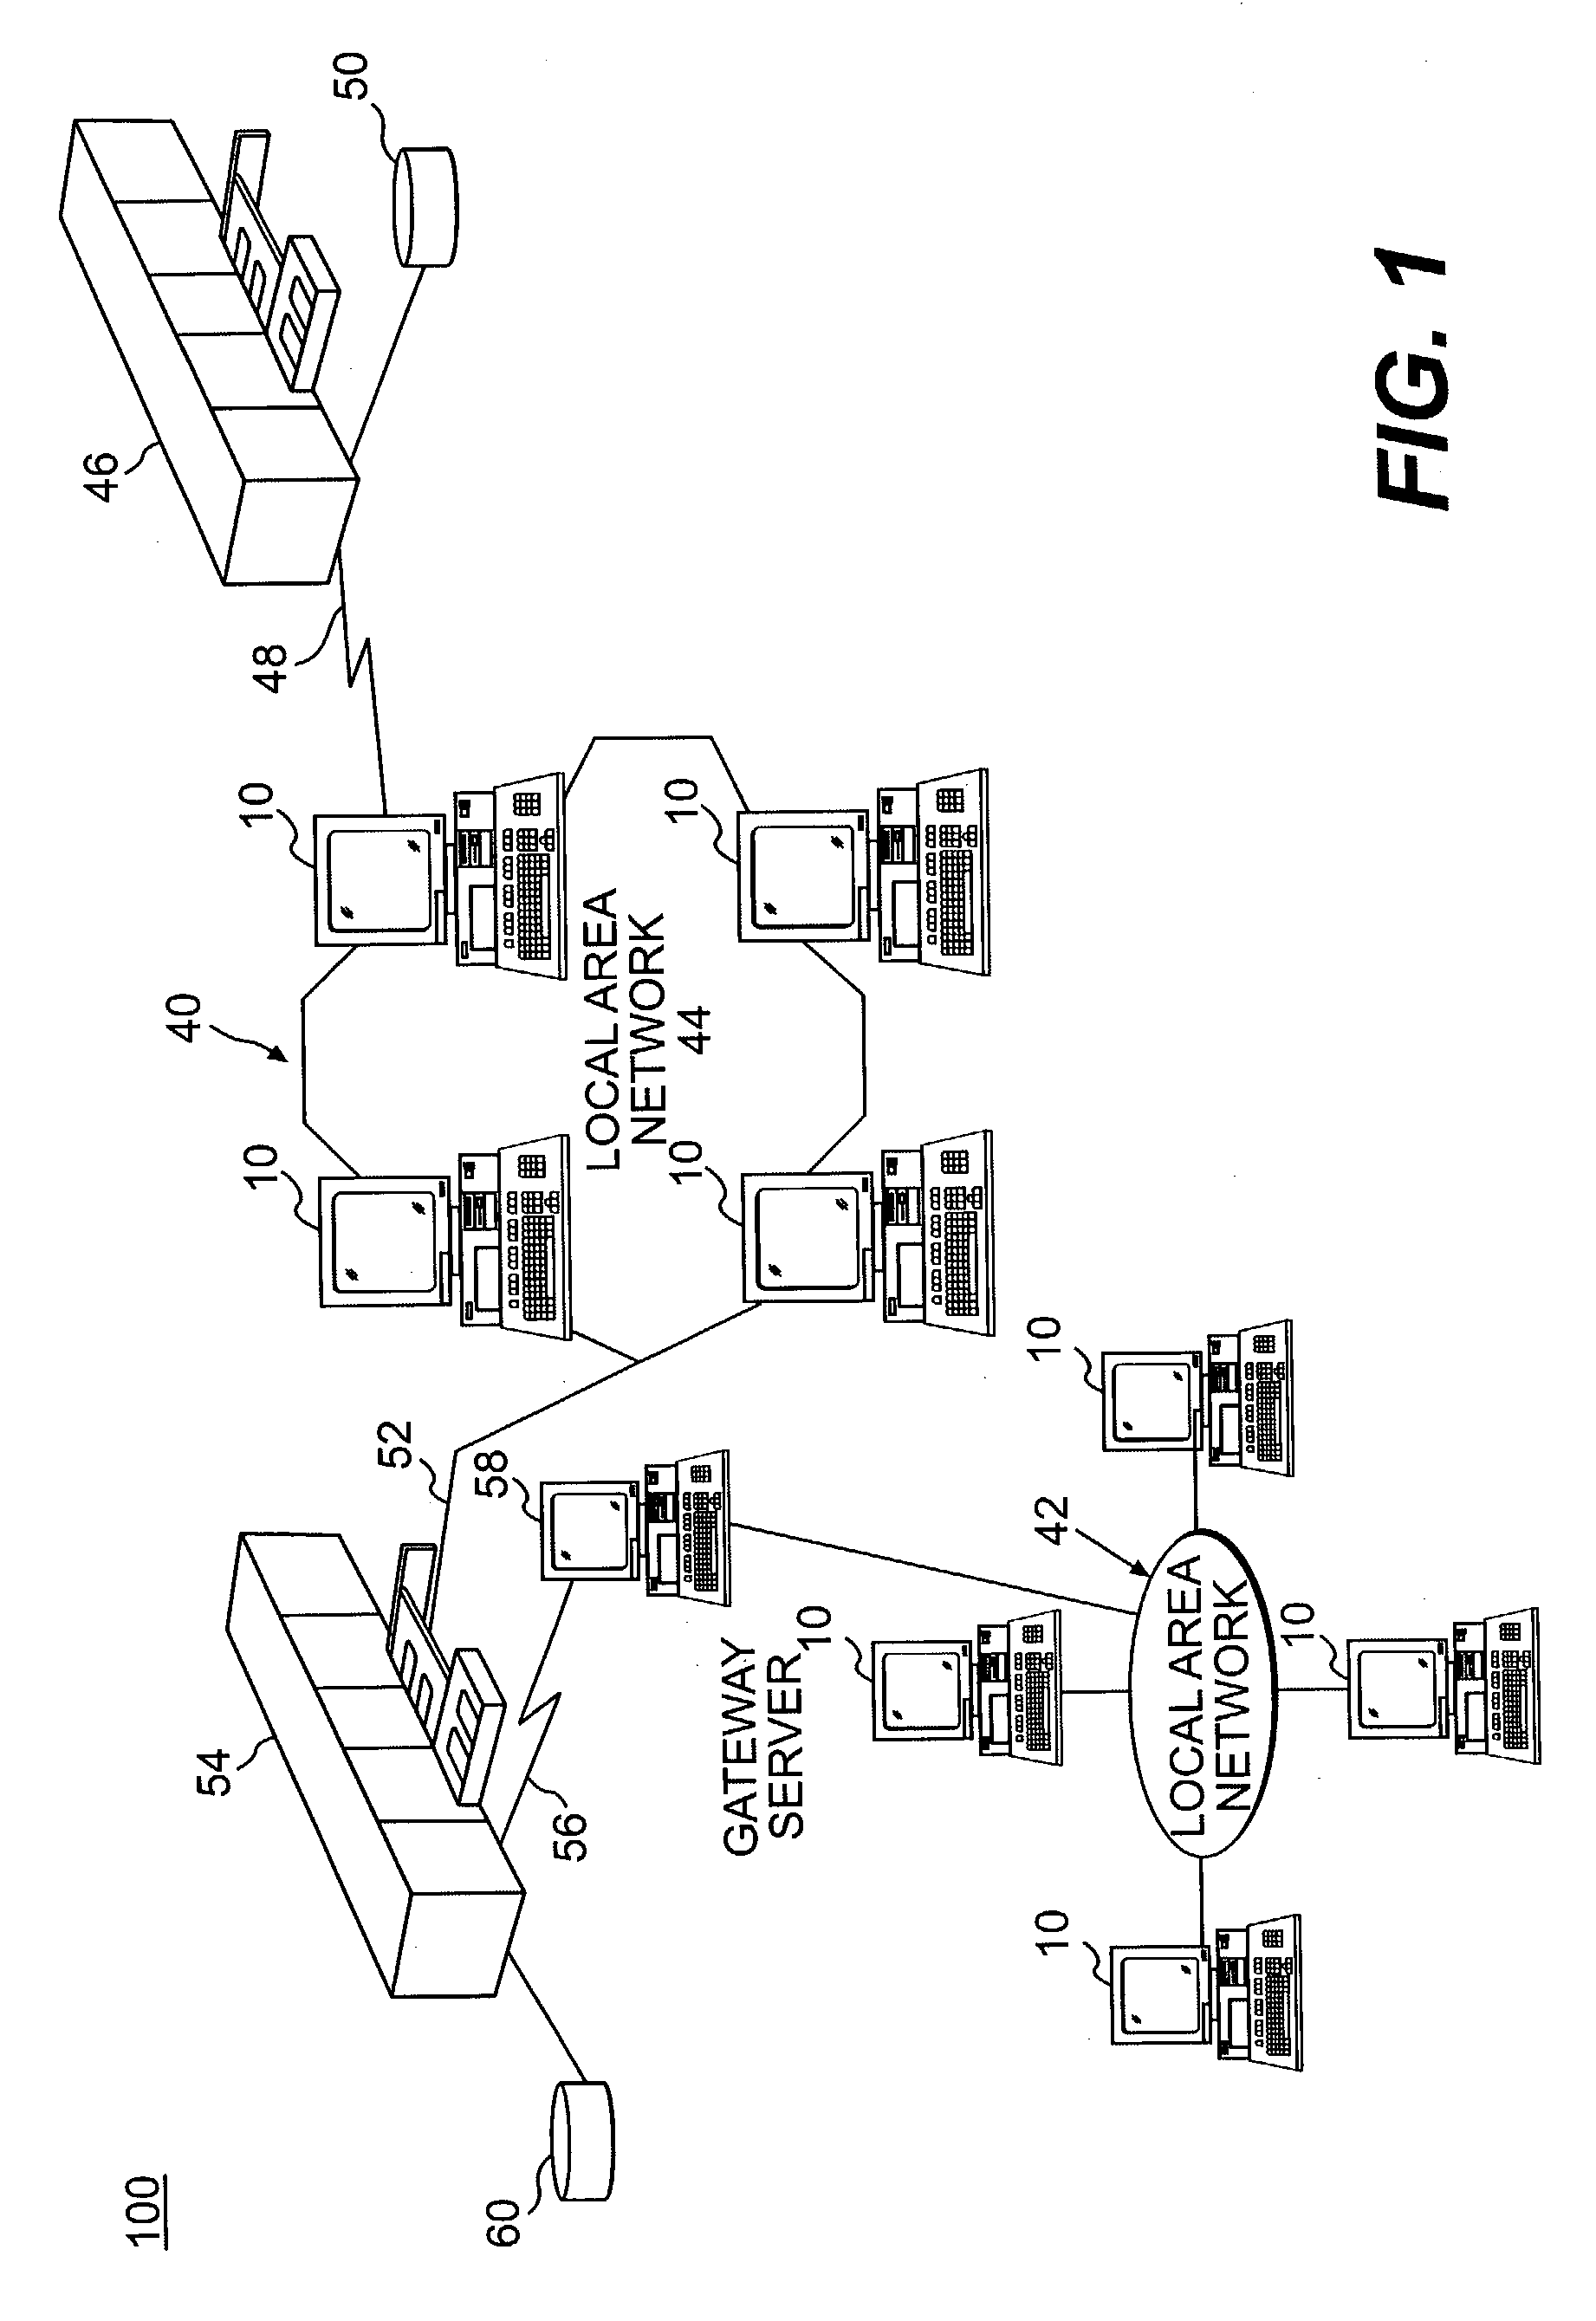 Method and apparatus for providing heightened airport security